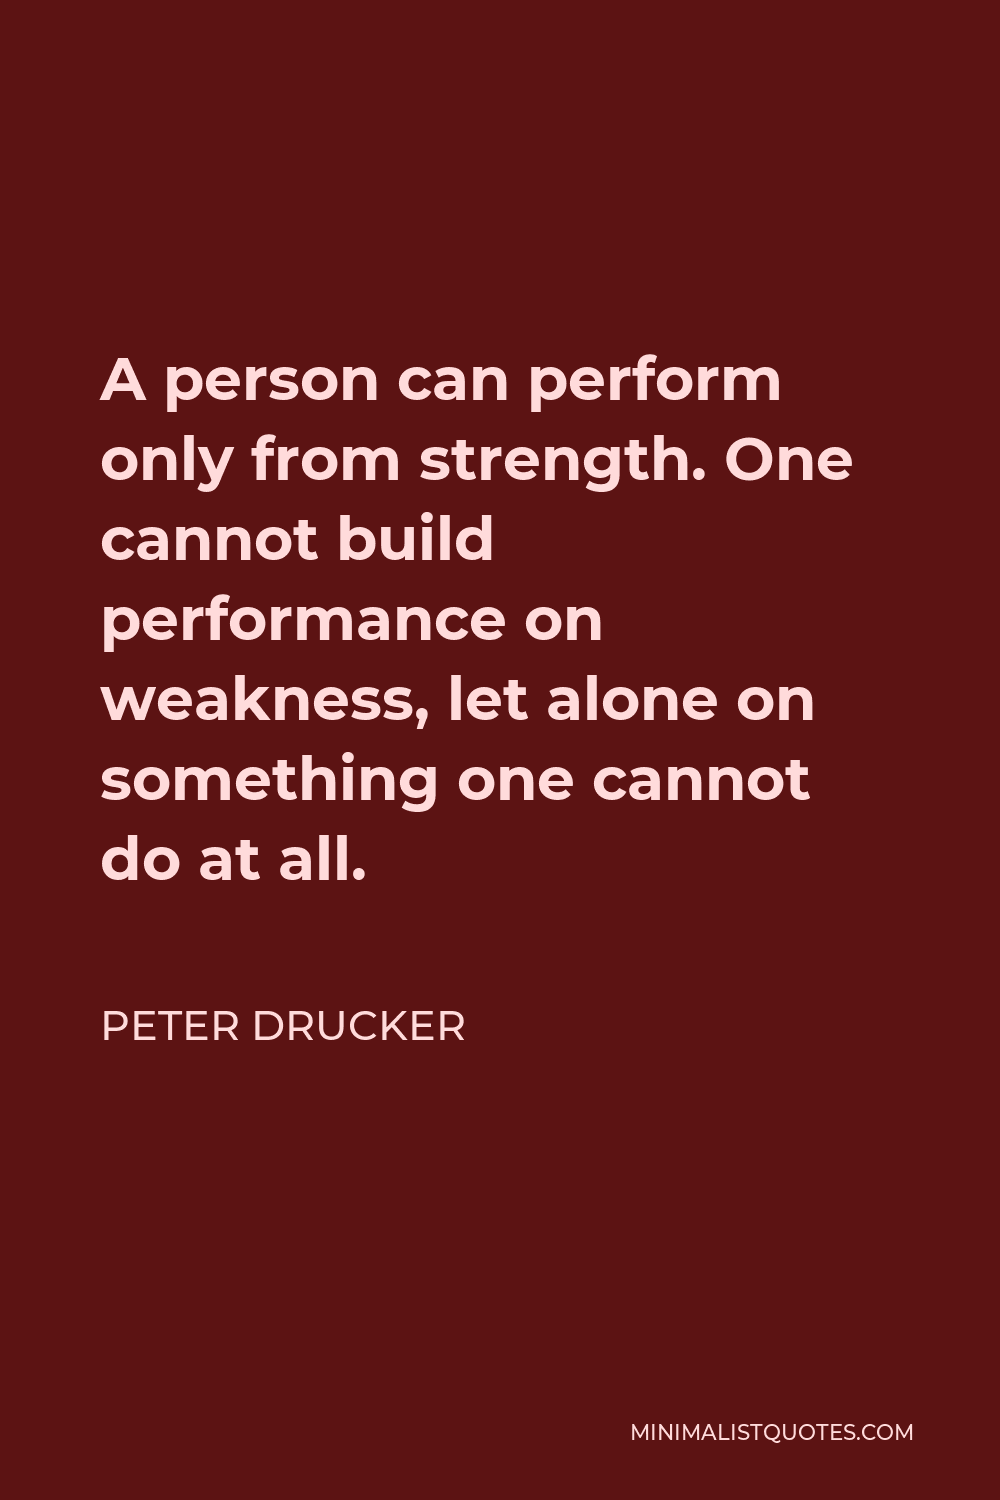 Peter Drucker Quote - A person can perform only from strength. One cannot build performance on weakness, let alone on something one cannot do at all.